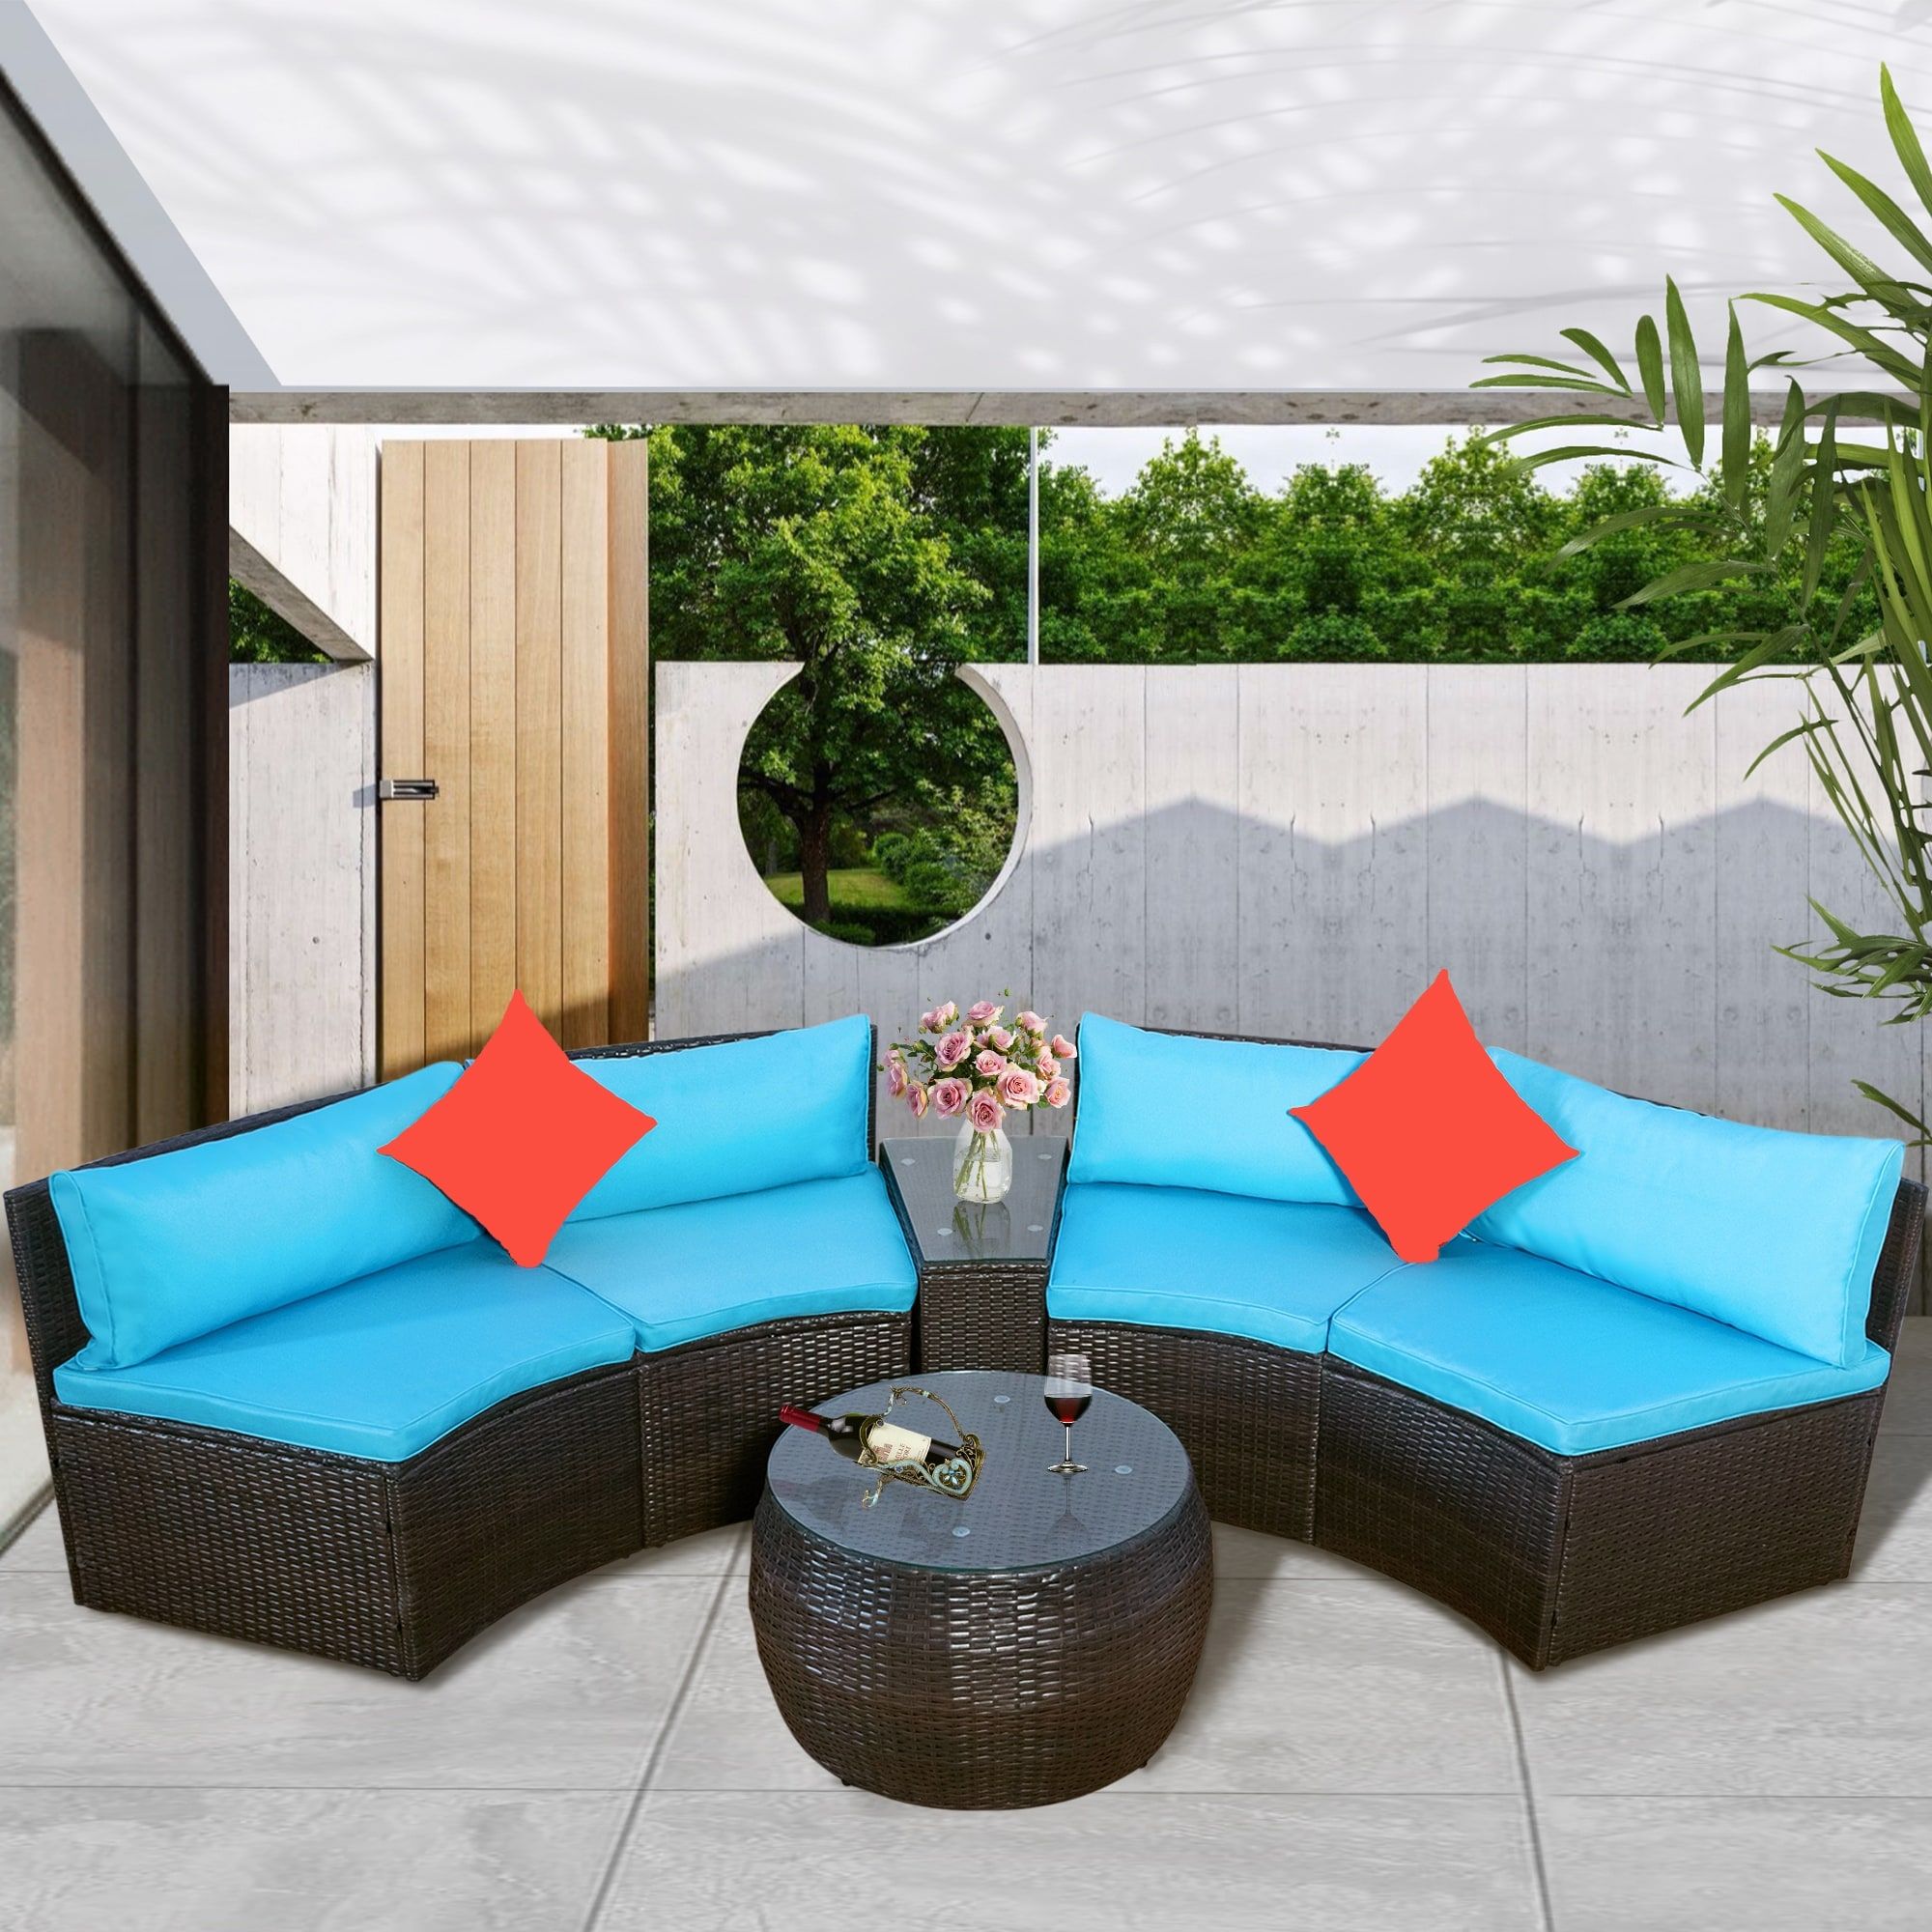 4 Piece Rattan Outdoor Patio Furniture Sofa Sets With Round Coffee Table,  Half Moon Sectional Sofa, With Cushion And Pillow – Bed Bath & Beyond –  37425352 In Outdoor Half Round Coffee Tables (View 10 of 15)